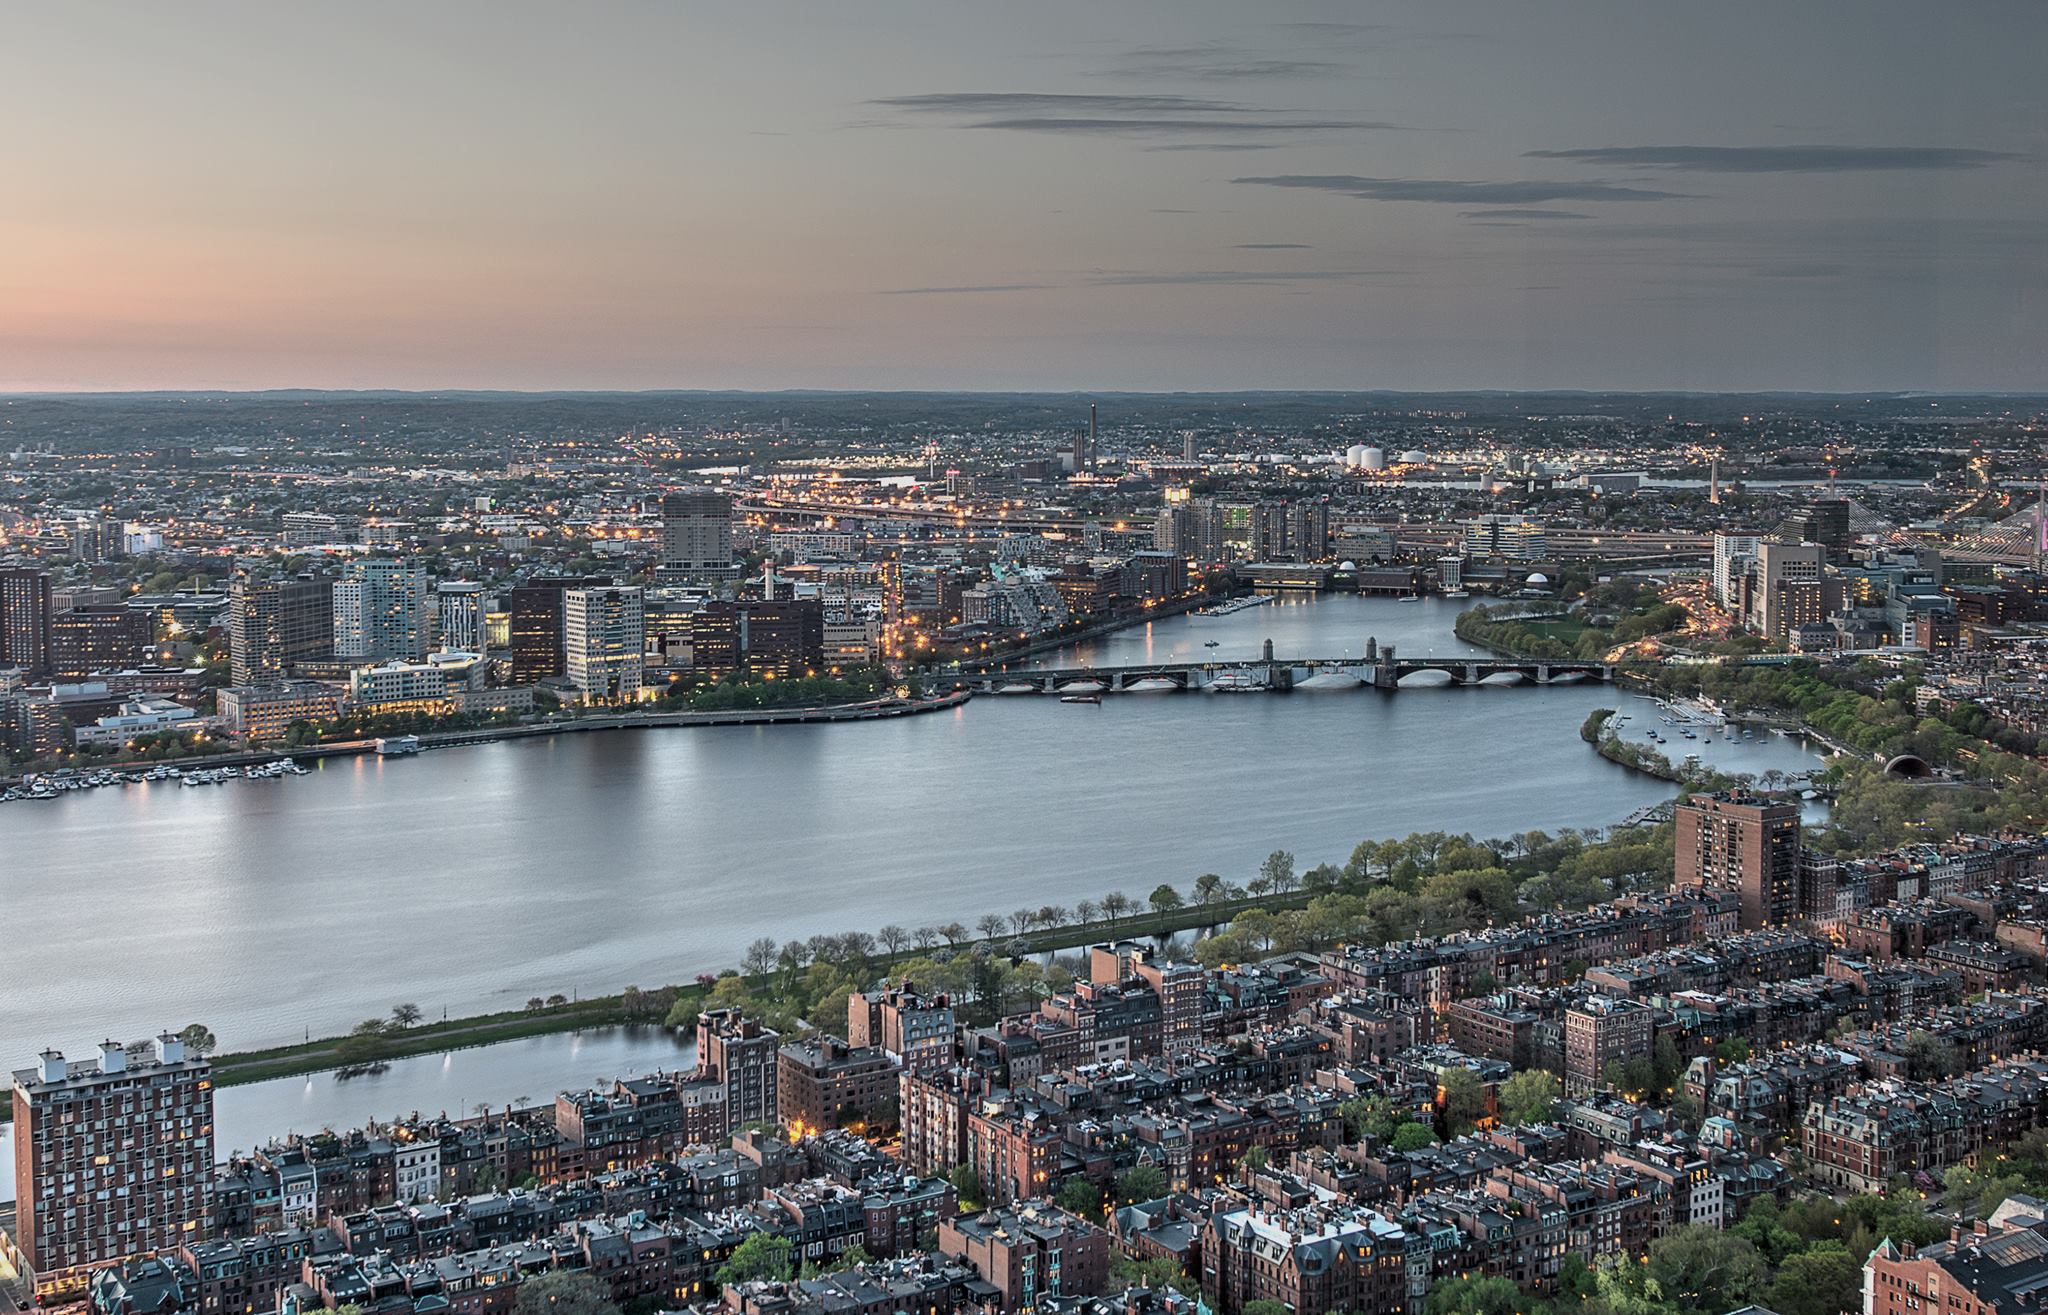 A new poll concerning Boston's proposed bid for the 2024 Olympic and Paralympic Games has shown support continues to decline ©No Boston Olympics/Facebook